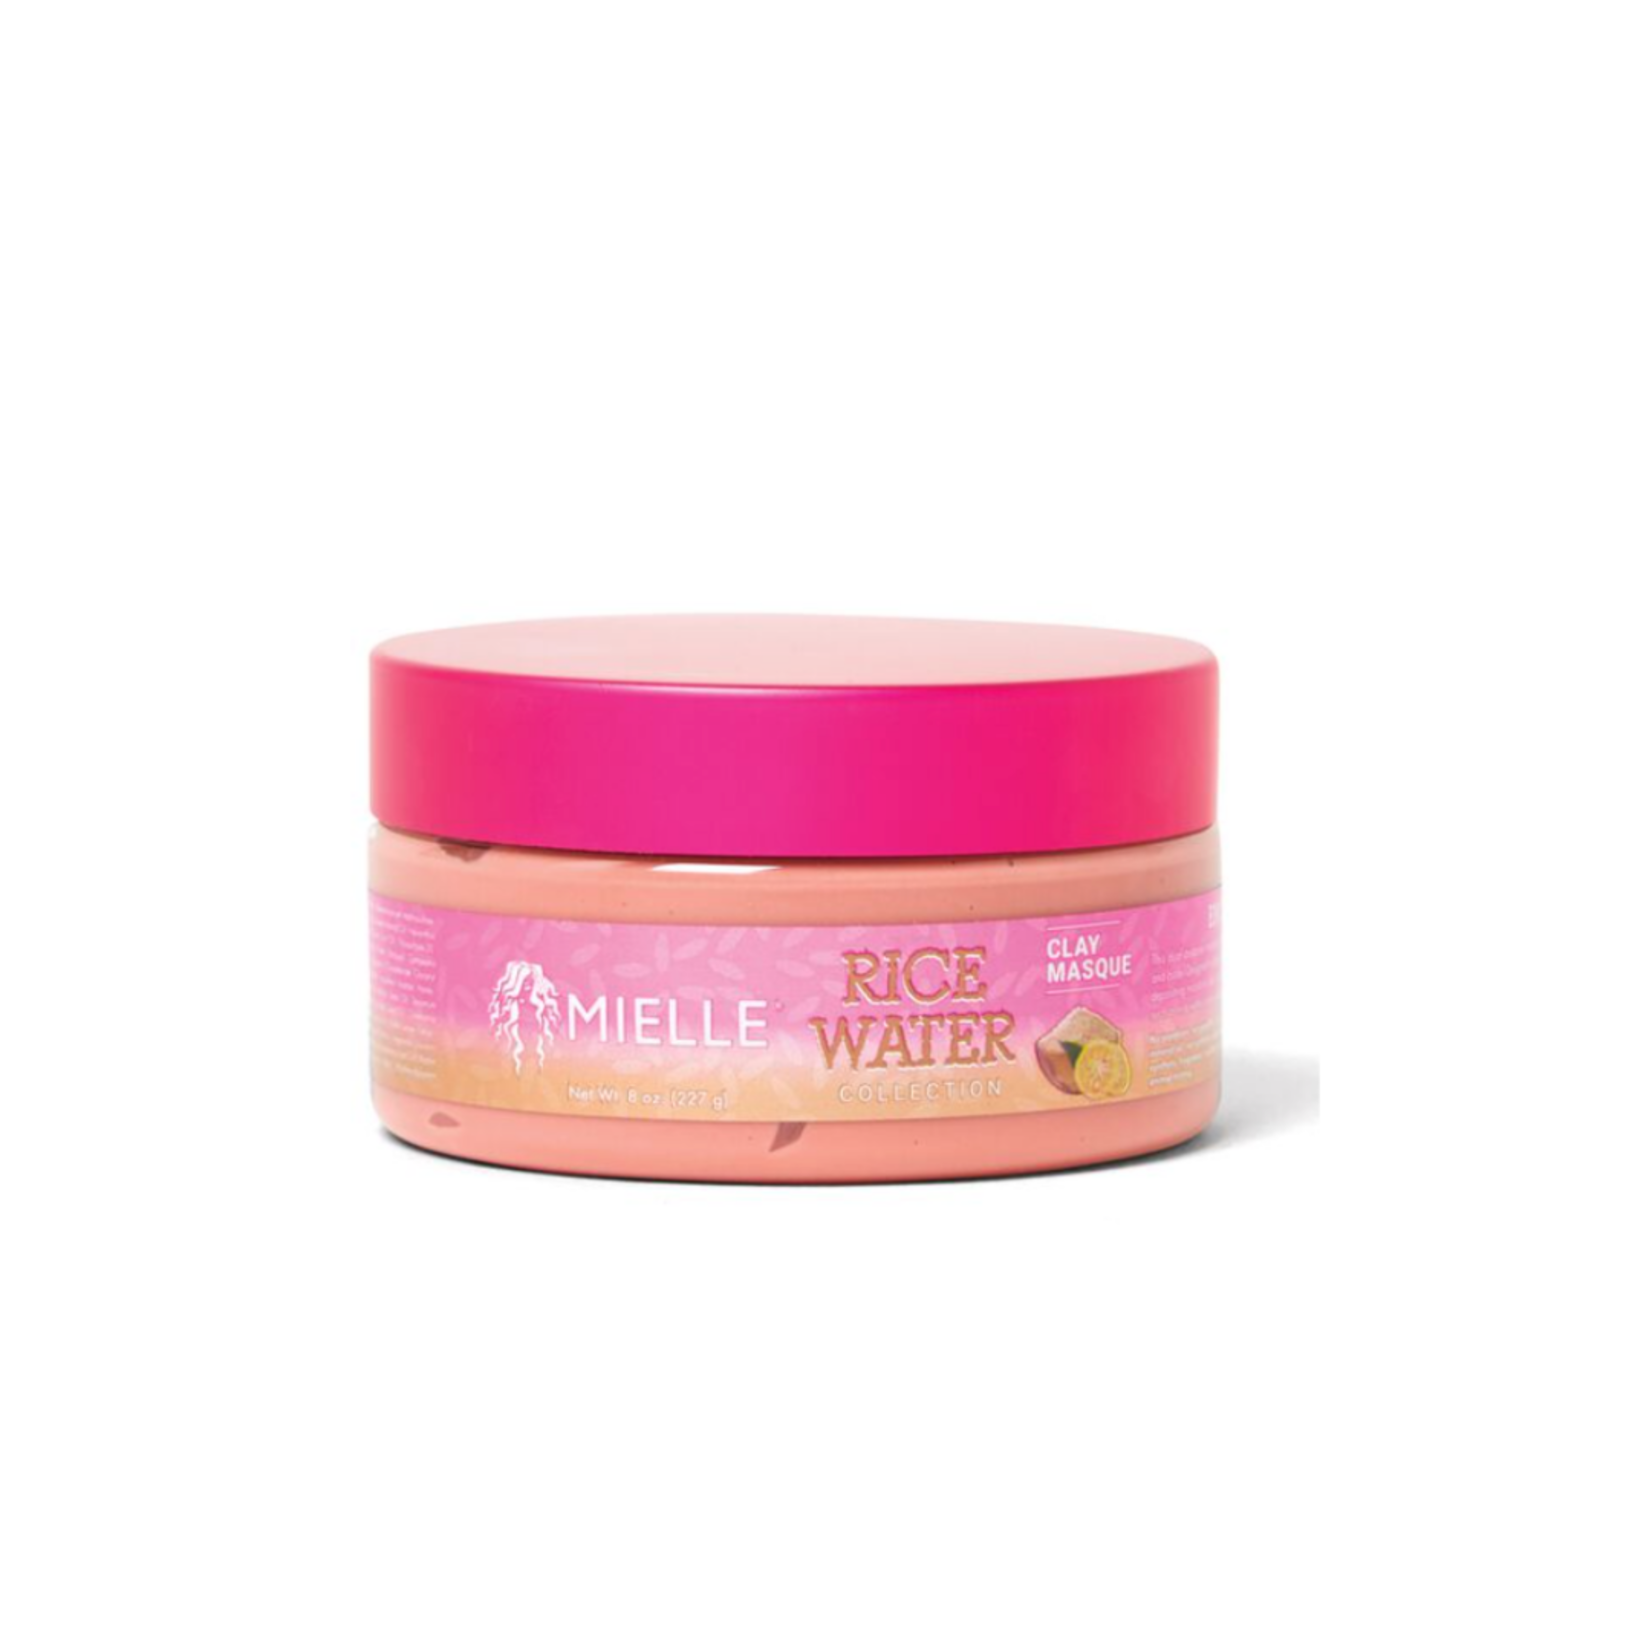 Mielle Mielle Rice Water Collection Clay Masque